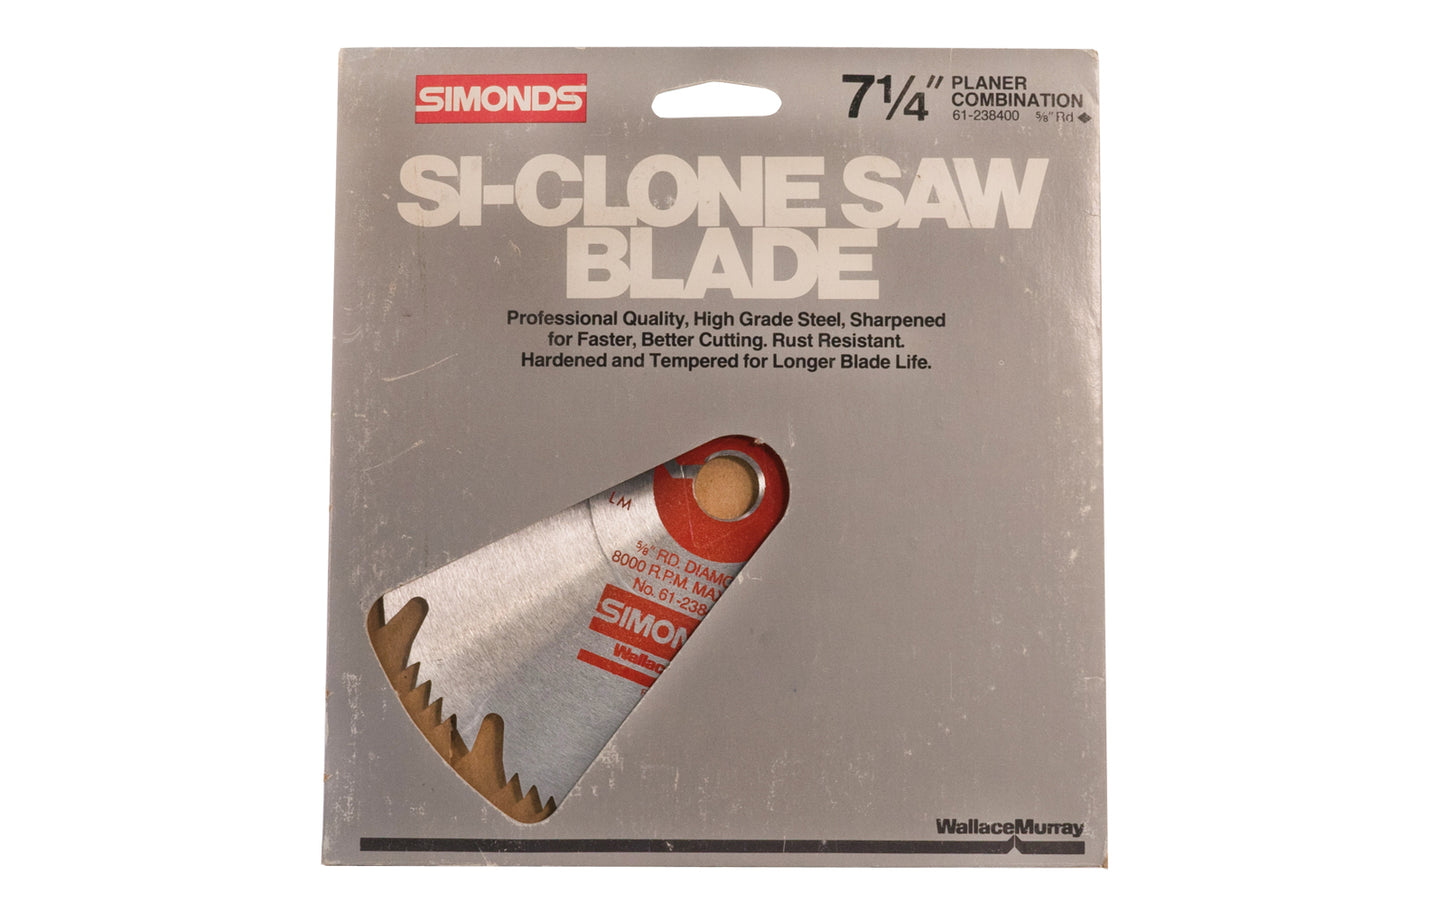 Simonds 7-1/4" Si-Clone Planer Combination Saw Blade. For extra smooth cutting in any direction. 5/8" RD. Diamond. 8000 RPM